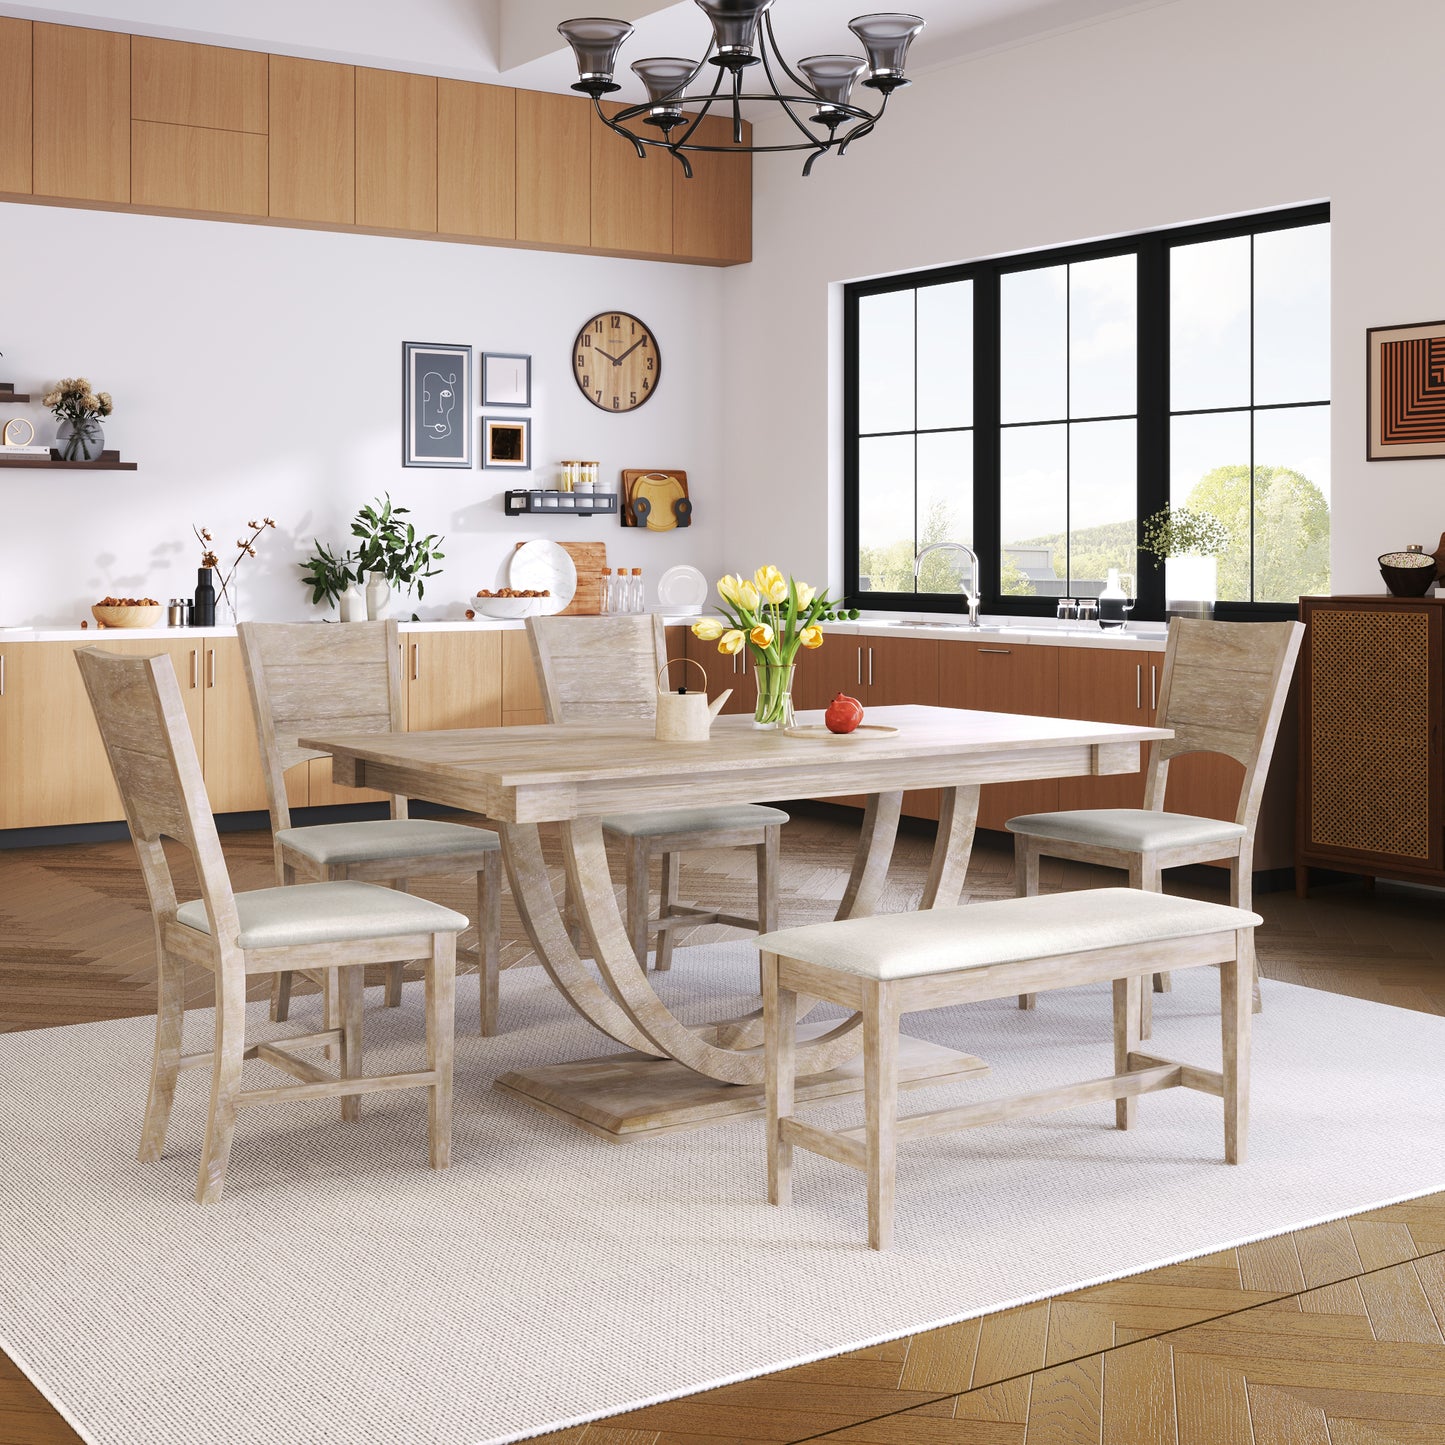 TOPMAX 6-Piece Wood Half Round Dining Table Set Kitchen Table Set with Long Bench and 4 Dining Chairs, Modern Style, Natural